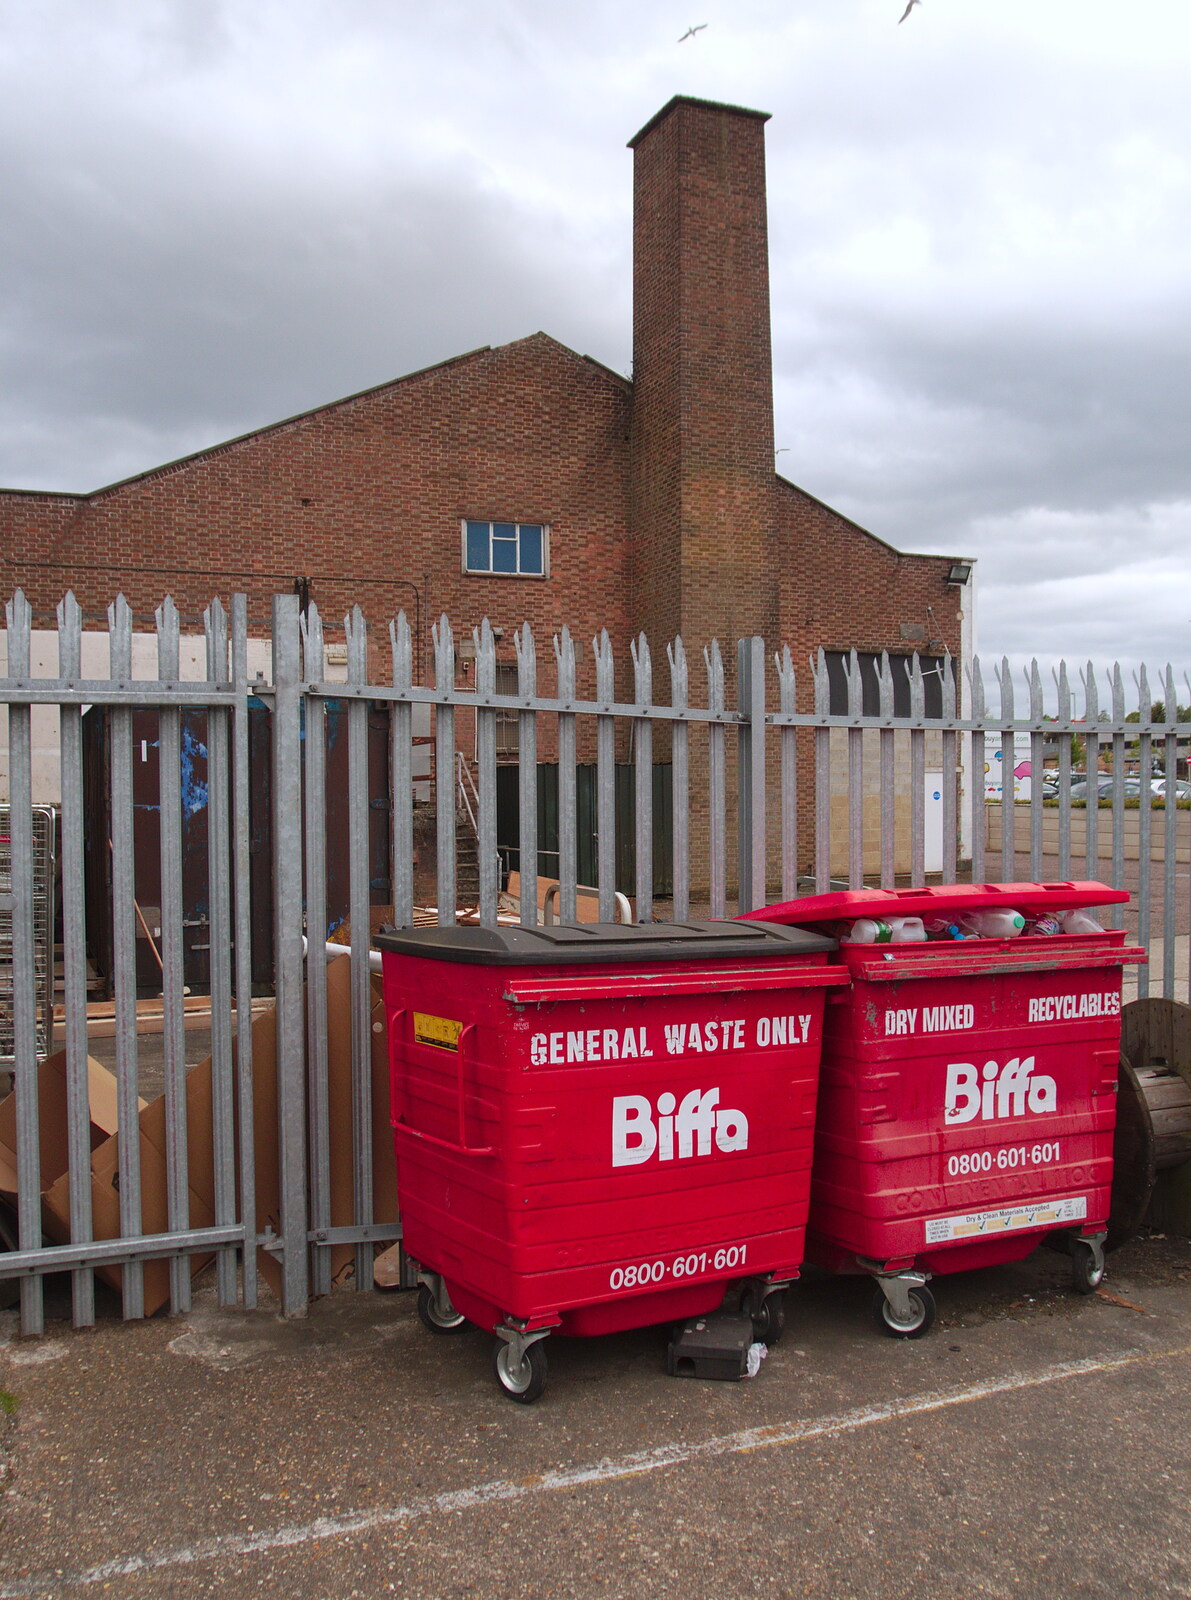 Biffa bins and some old warehouse building from A Mini Qualcomm Reunion, The Wrestlers, Cambridge - 26th April 2019